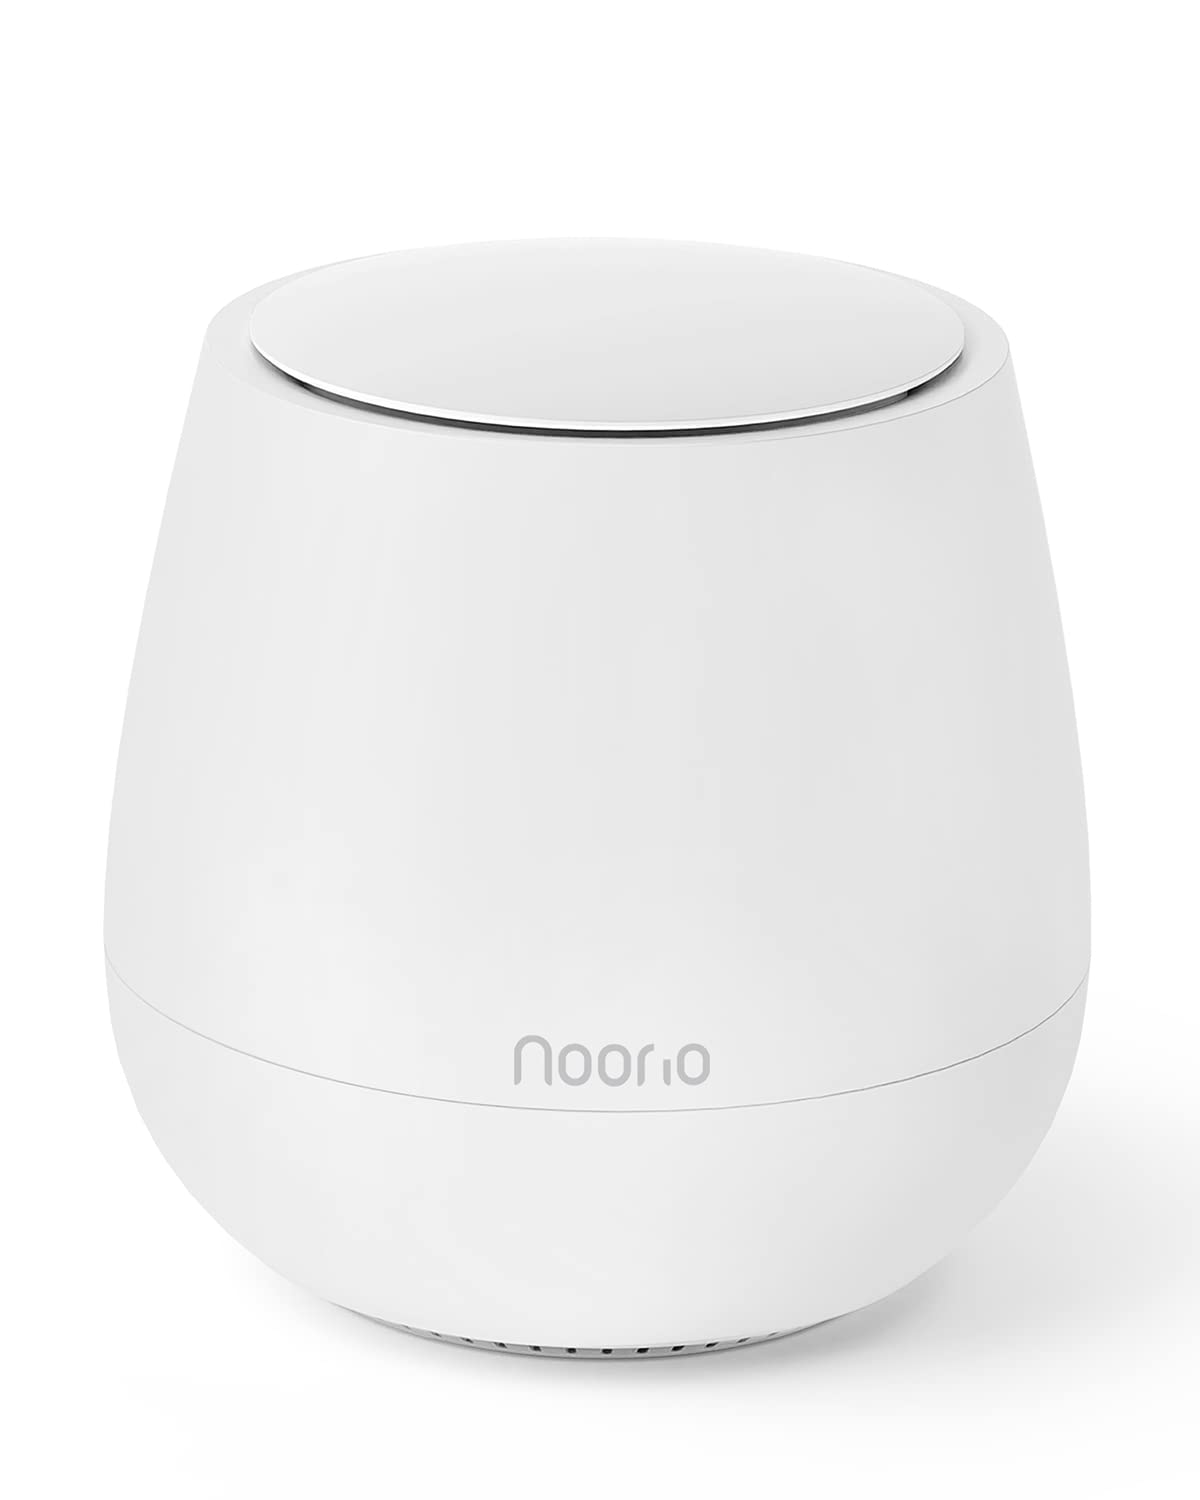 Noorio Hub, Compatible with All Noorio Devices-B200, B210, B310, H200, H300, Expand WiFi Coverage, 32G Local Storage